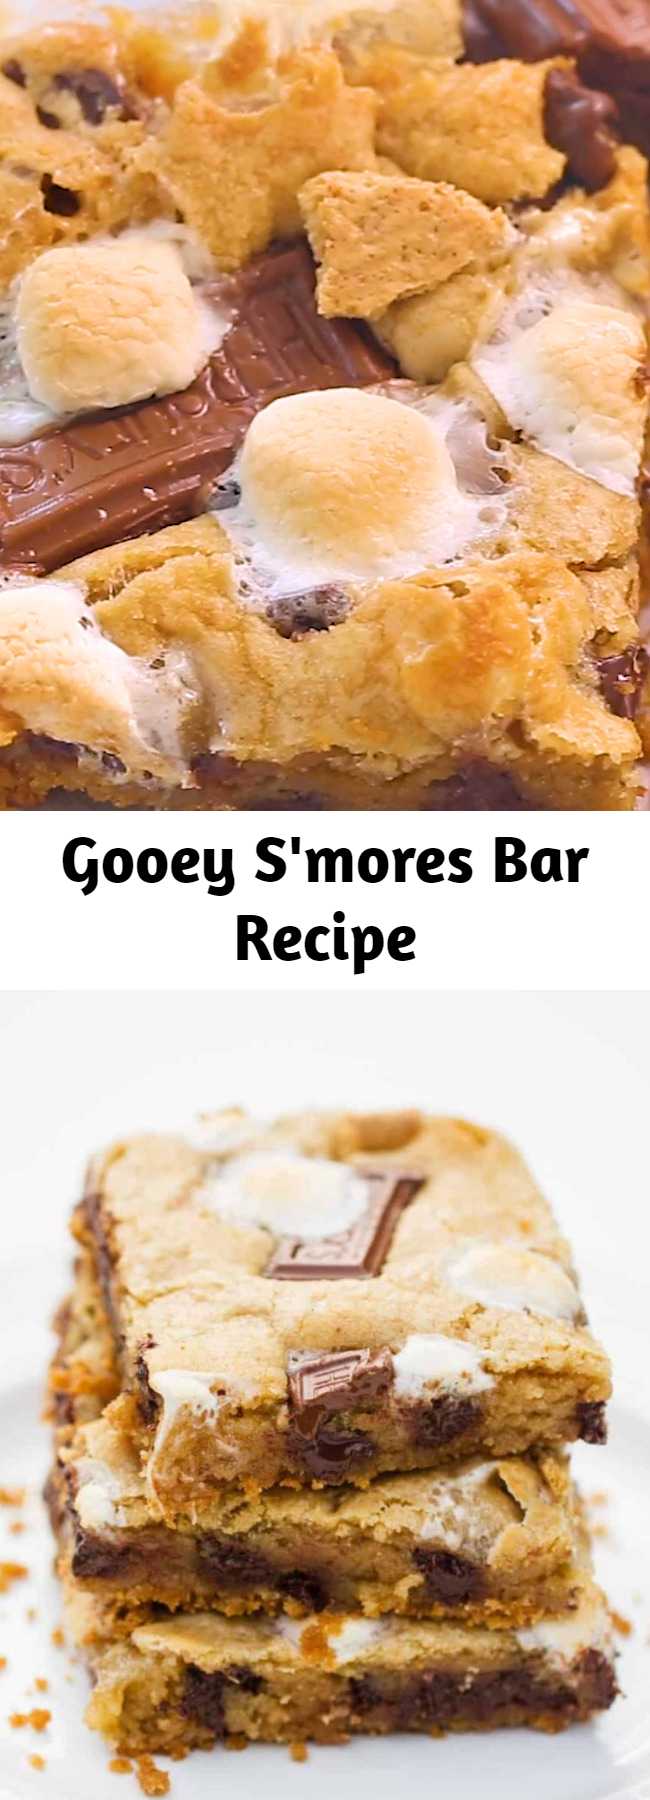 Gooey s'mores bars filled with a graham cracker crust and loaded with chocolate chips, marshmallows and chocolate candy bar pieces. The ultimate cookie bar recipe that is out of this world! #cookiebars #smores #smoresbar #desserts #dessertrecipes #dessertideas #easydesserts #sweets #easyrecipe #recipes #food #foodrecipes